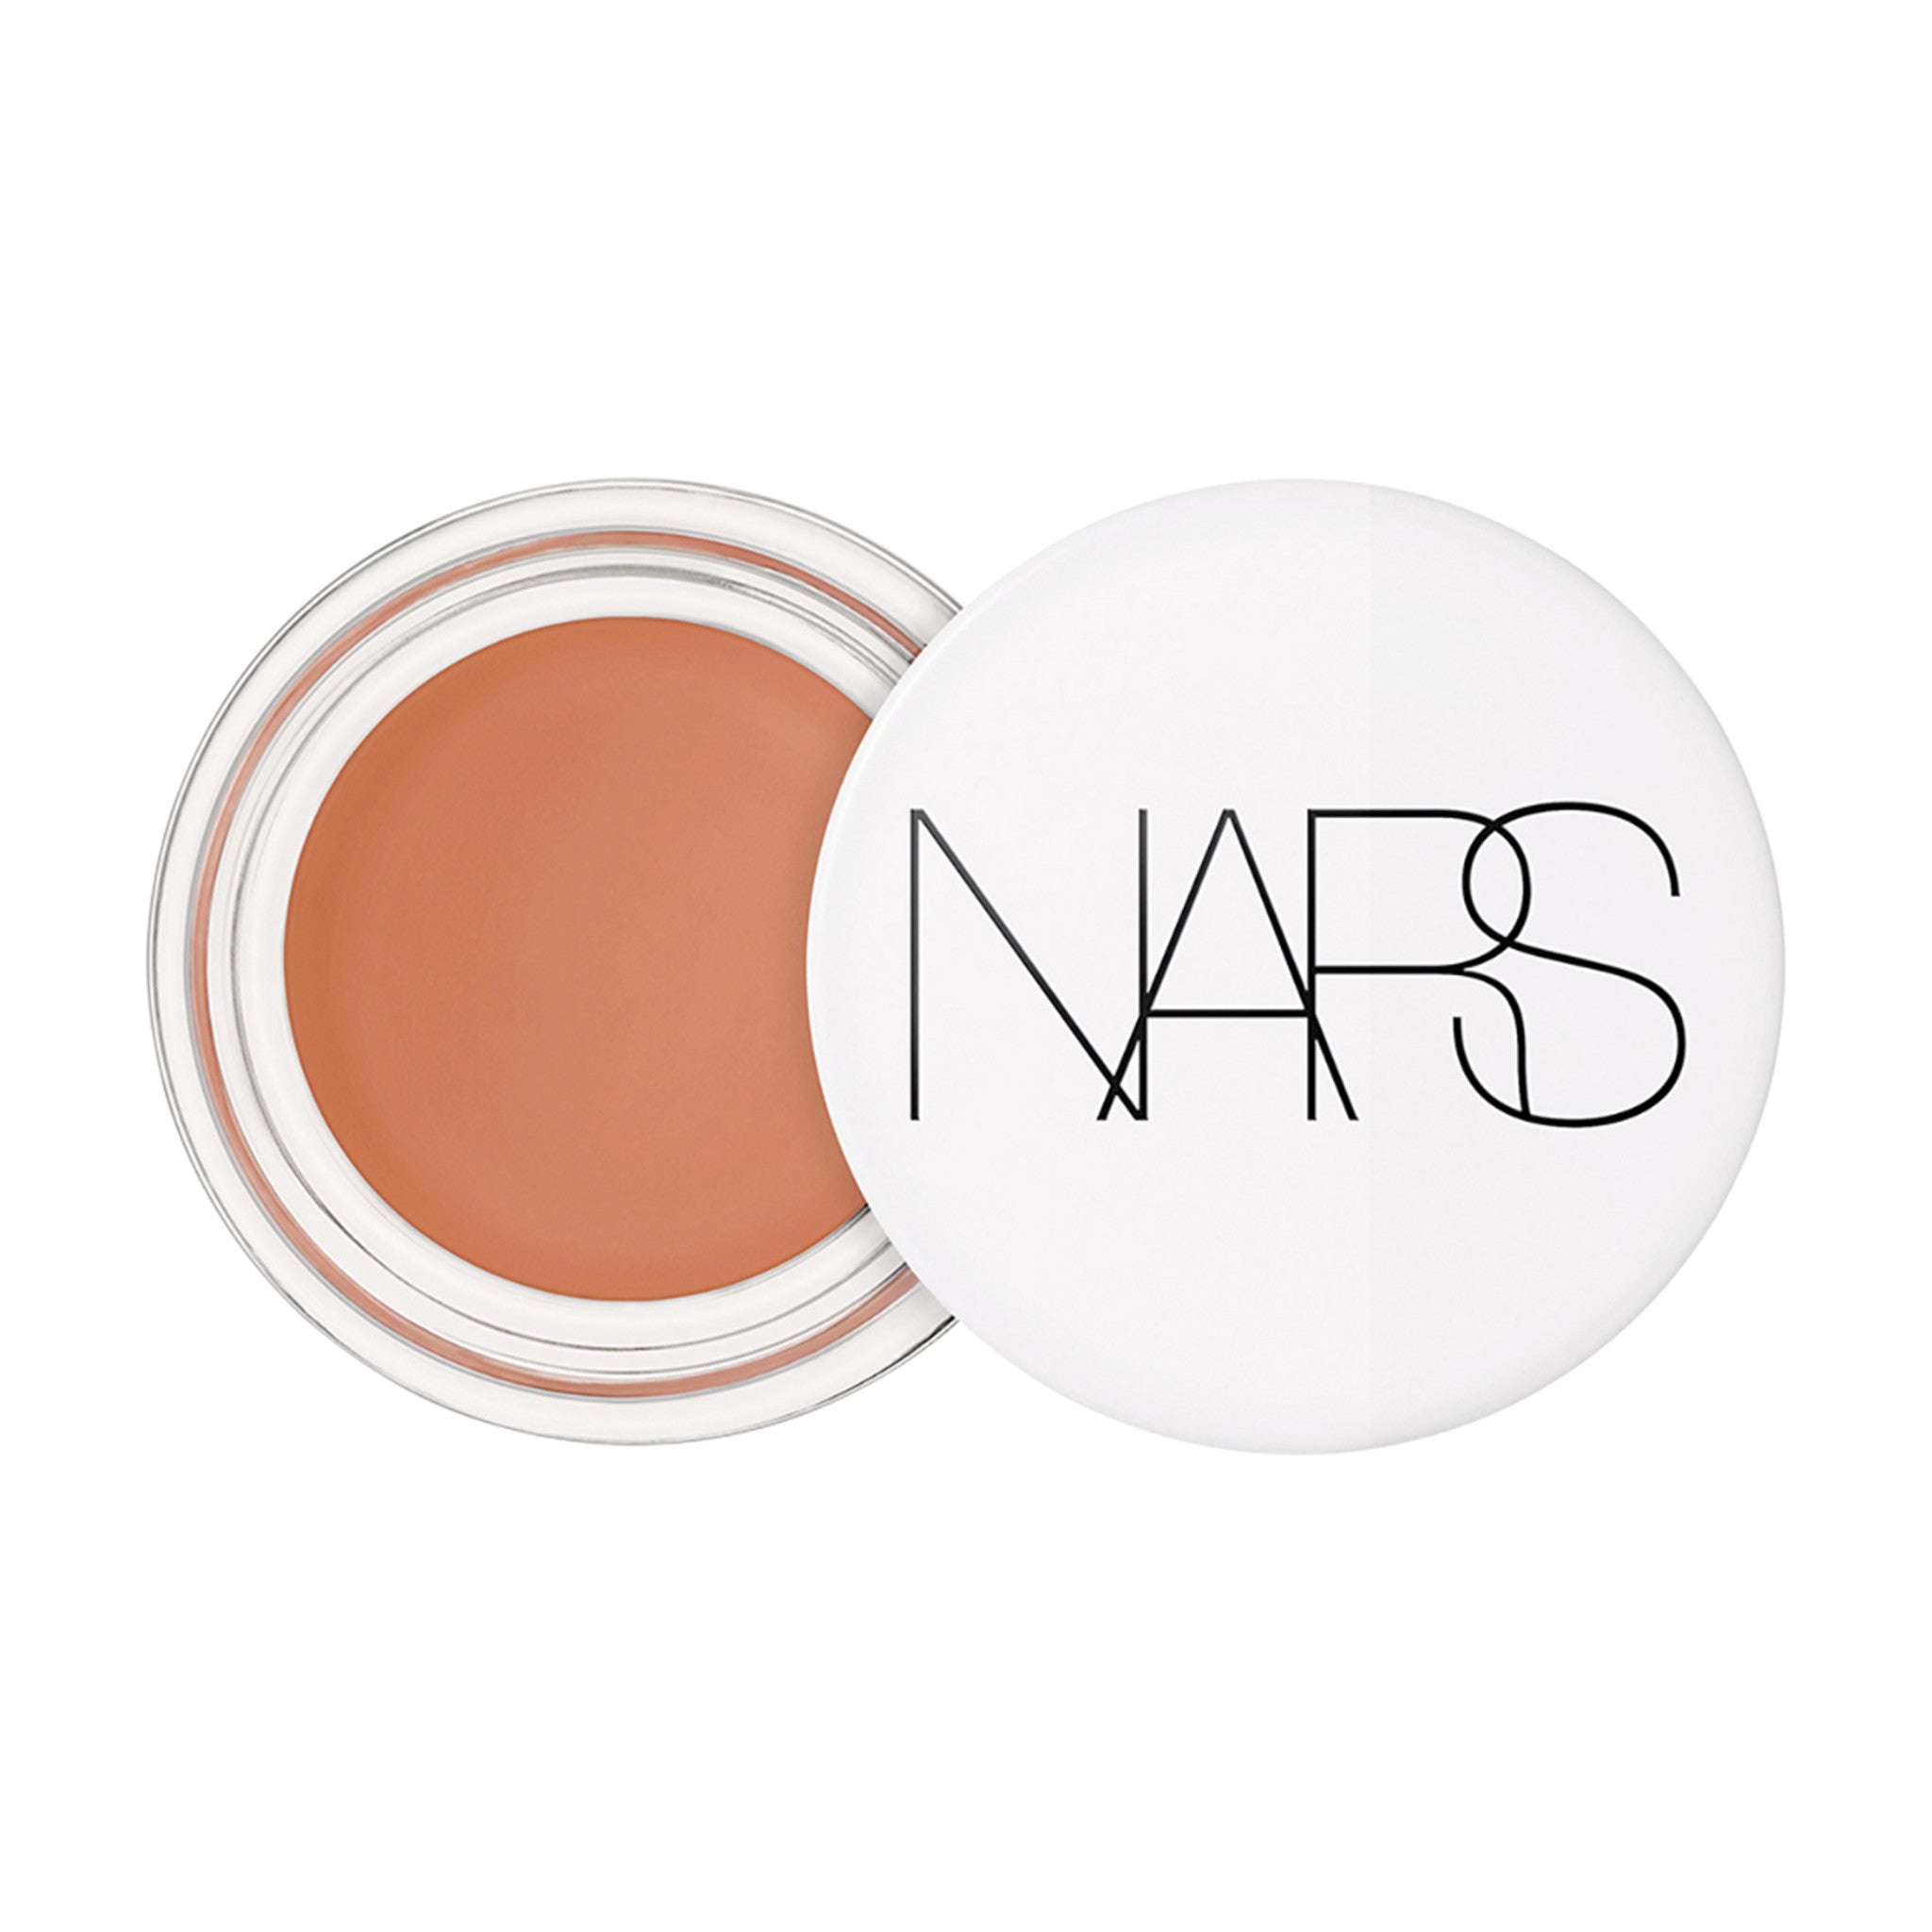 Nars Light Reflecting Eye Brightener Color/Shade variant: Magic Hour main image. This product is for medium complexions